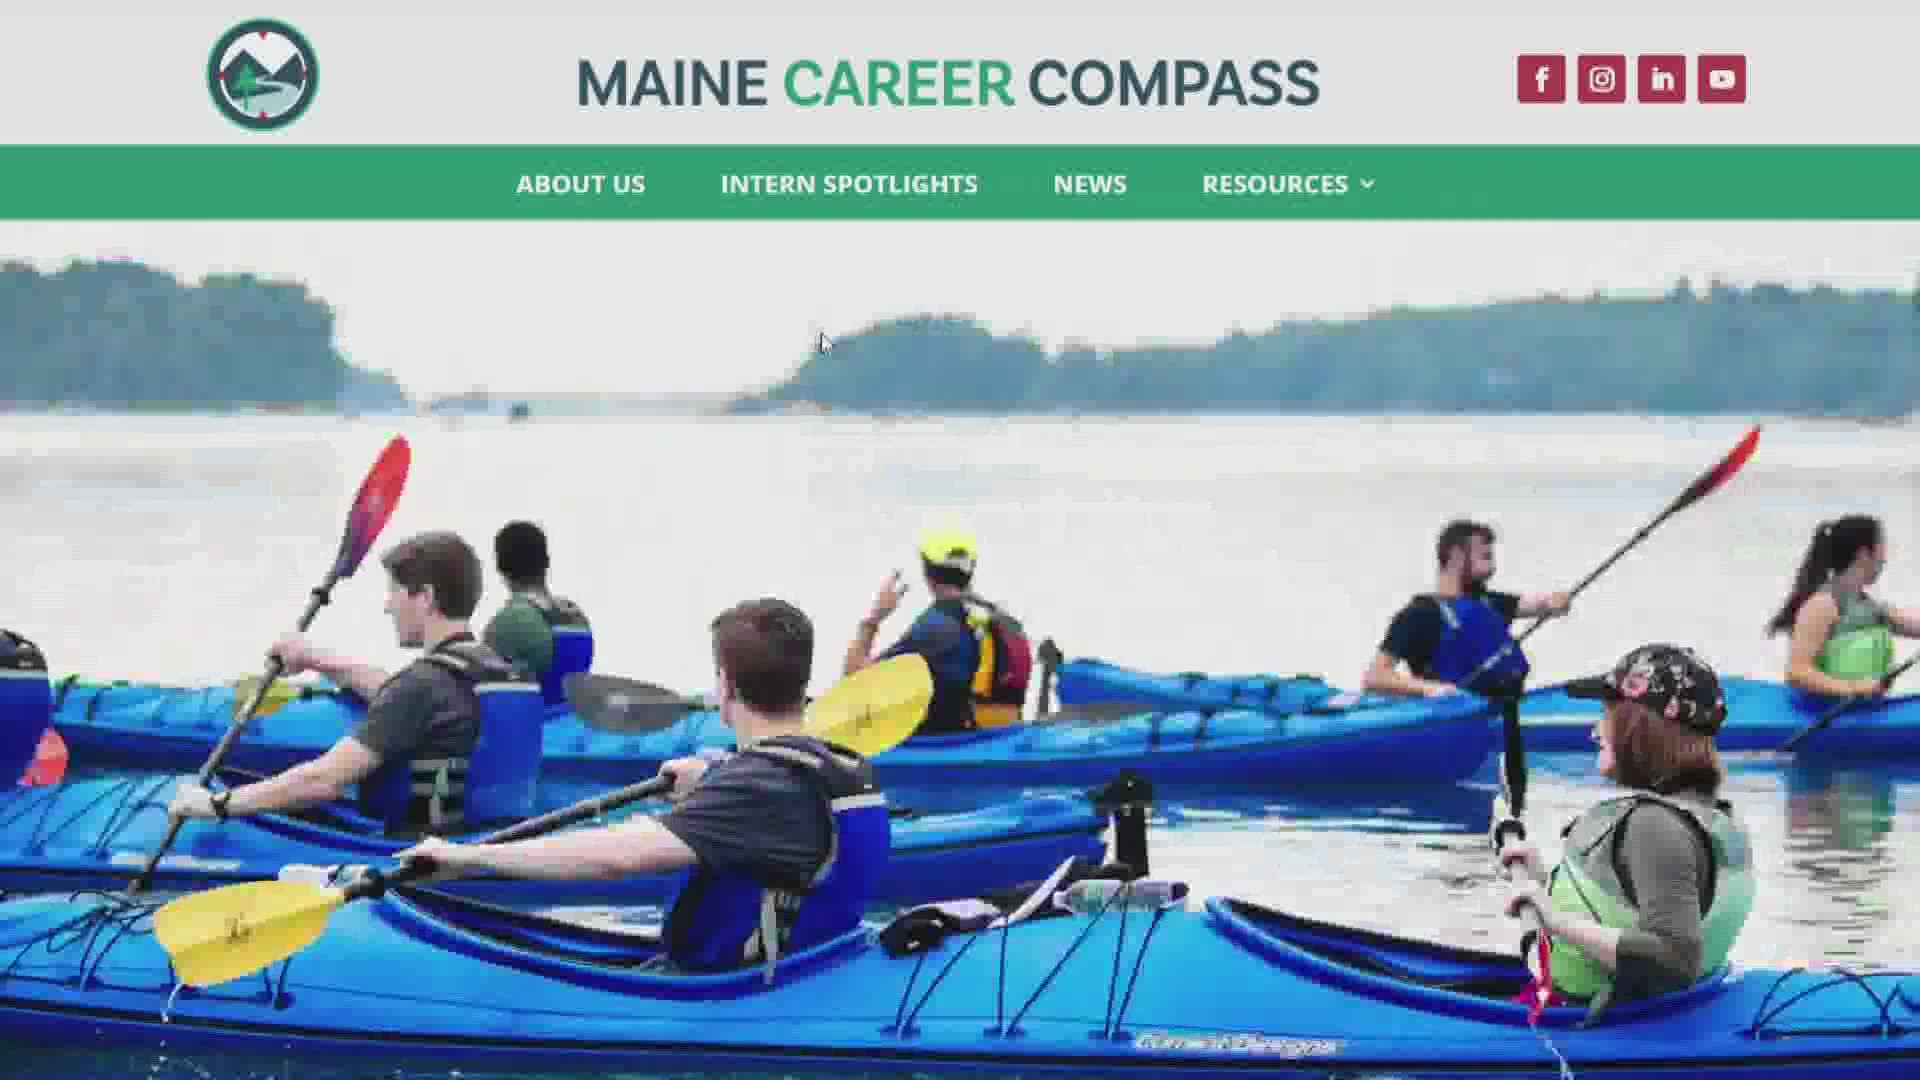 Internship program works to keep young professionals in Maine